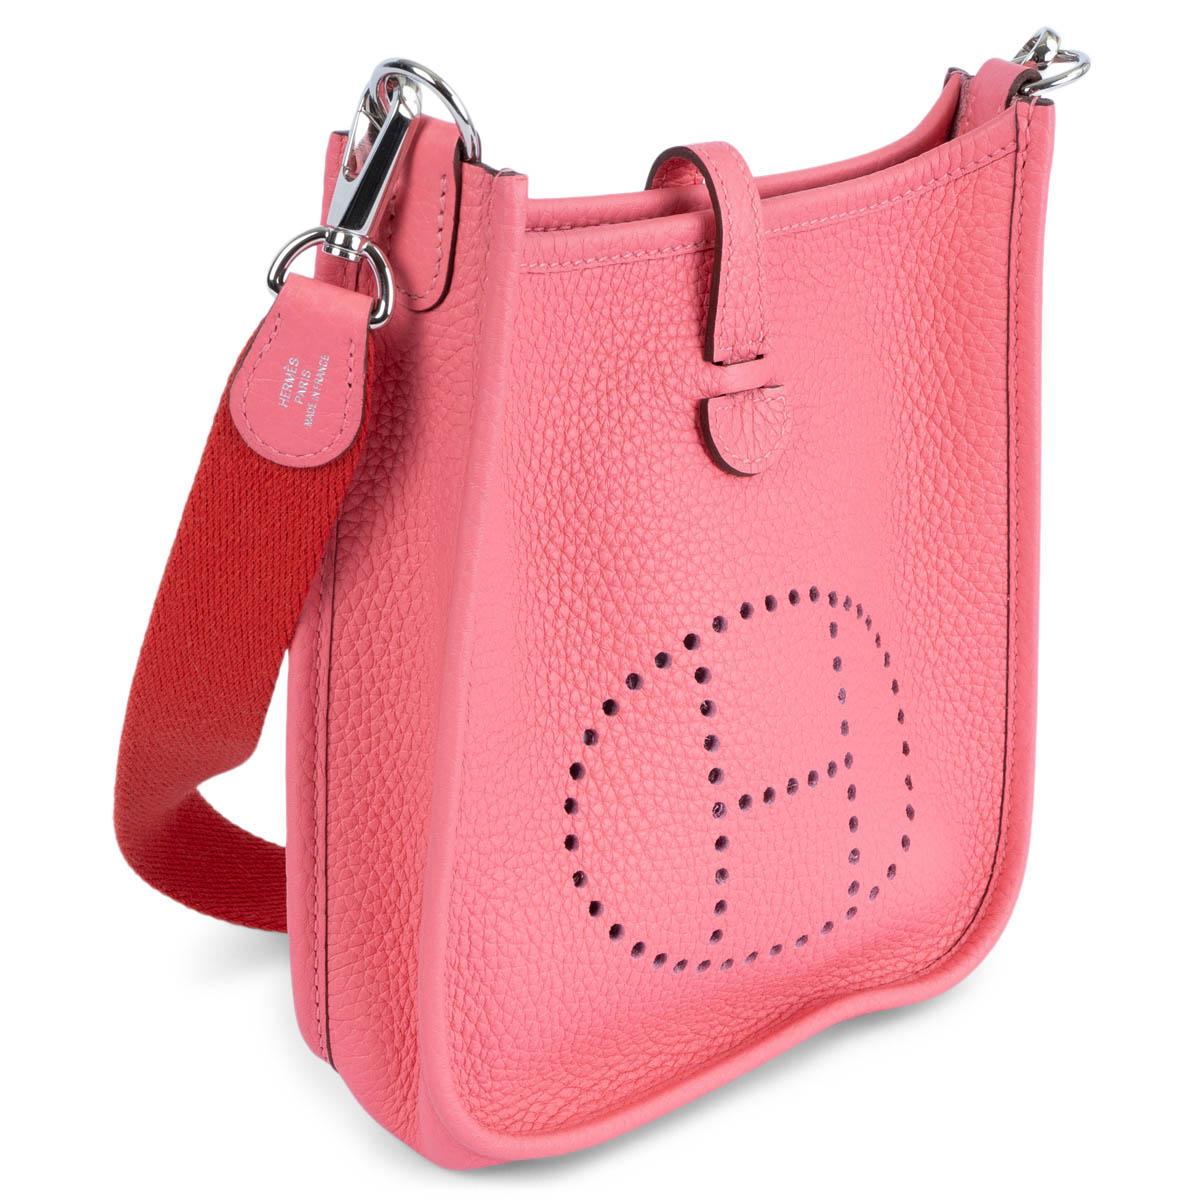 100% authentic Hermès Evelyne 16 TPM Crossbody Bag in Rose Azalee pink Taurillon Clemence leather with Rouge Pivoine red wool sangle strap, perforated leather 